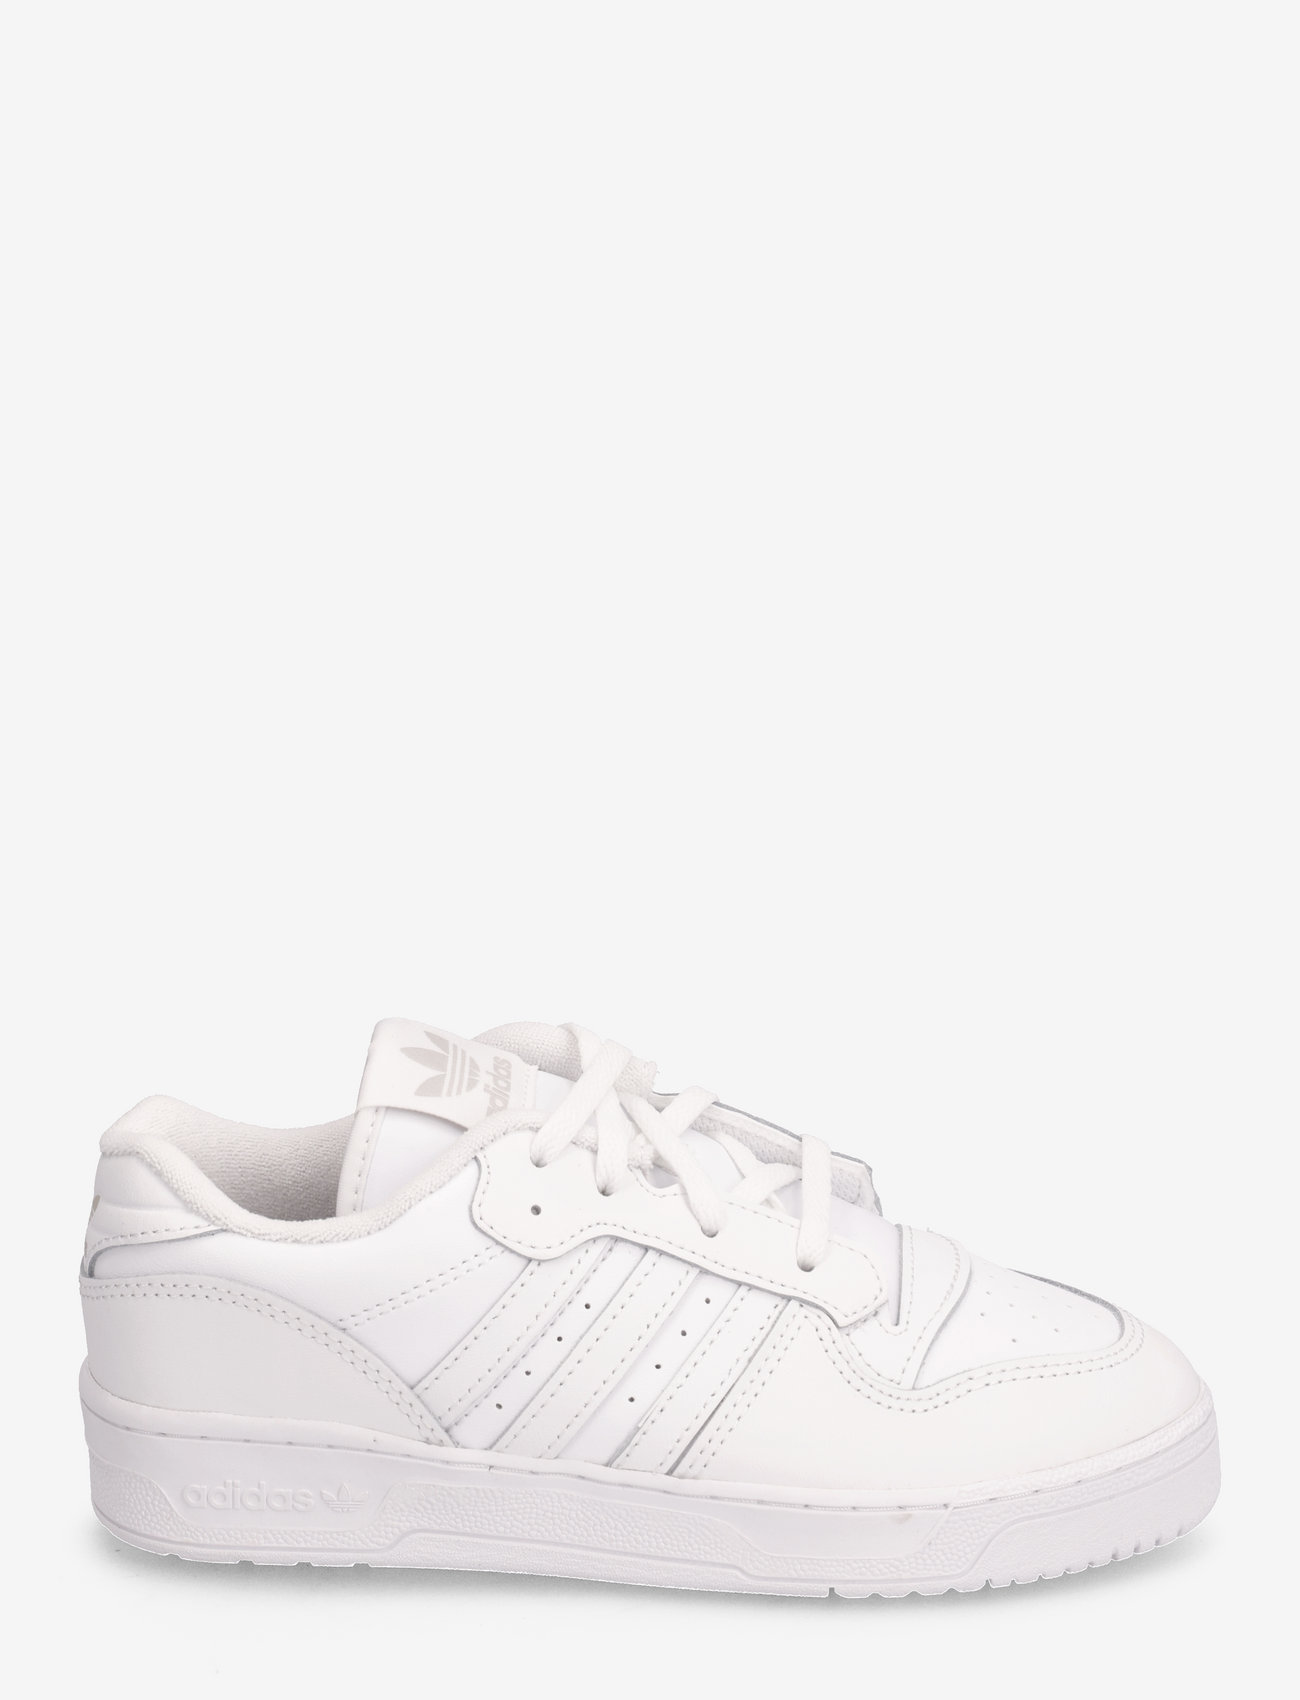 adidas Originals - RIVALRY LOW C - gode sommertilbud - ftwwht/ftwwht/greone - 1